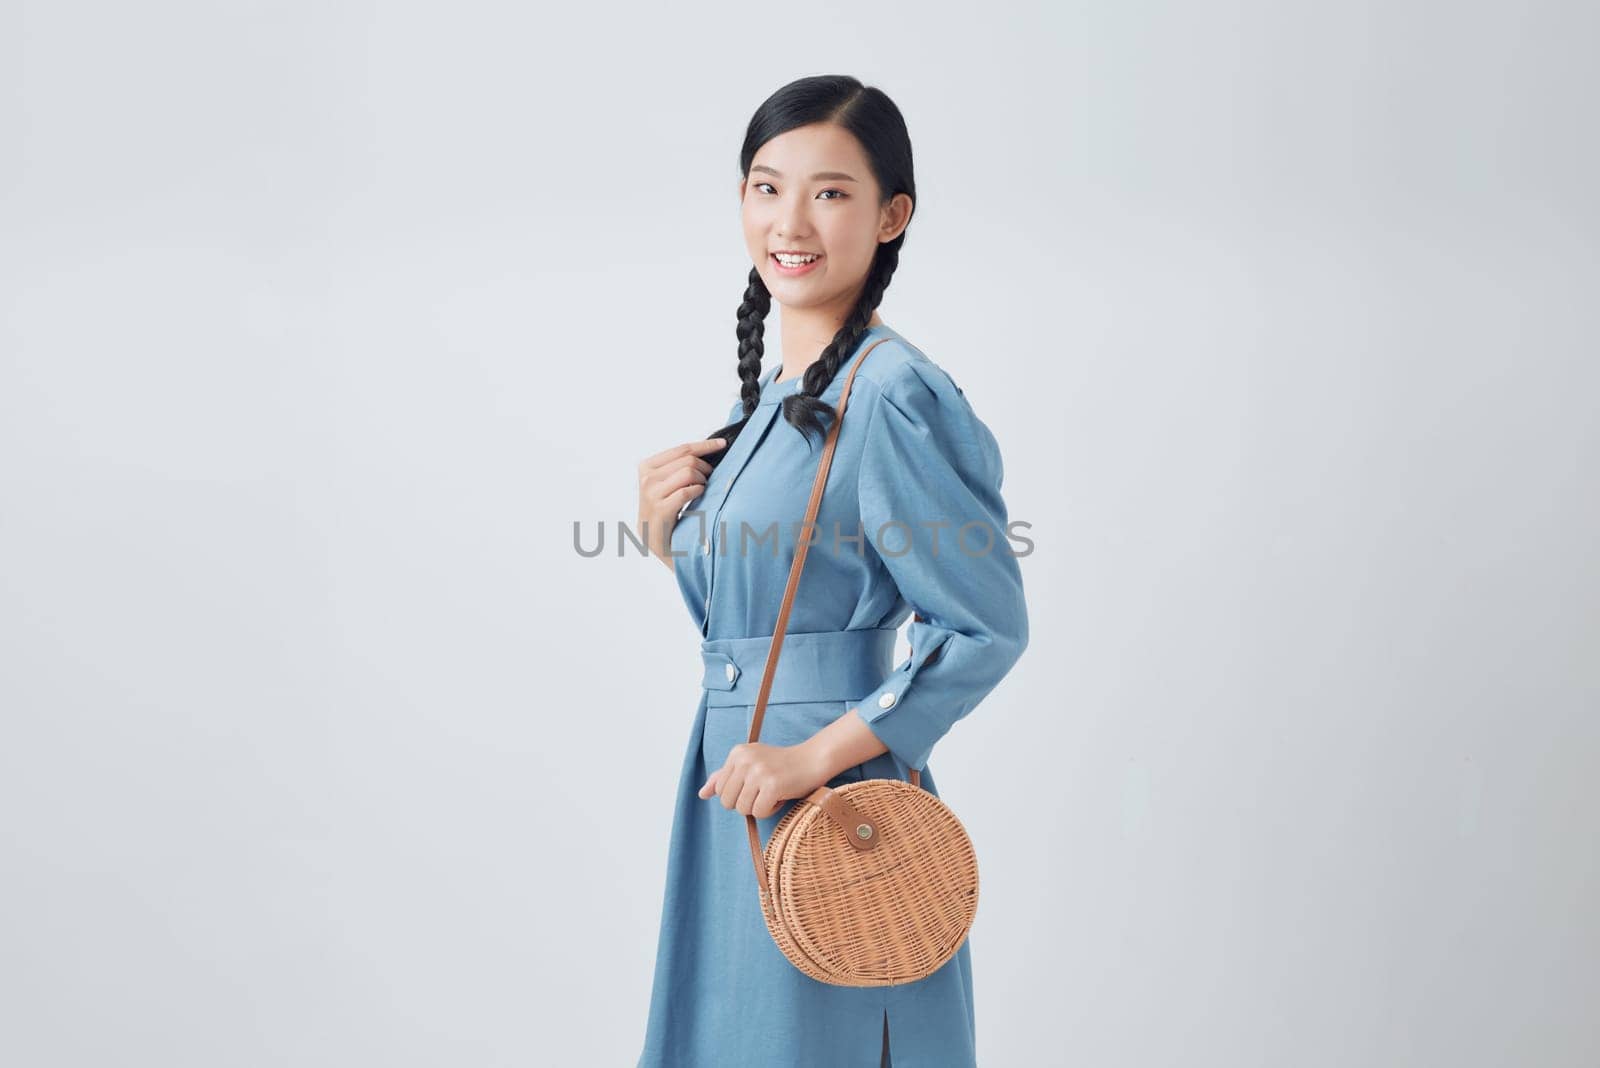  Portrait of a girl in a blue denim dress - isolated on white background. by makidotvn